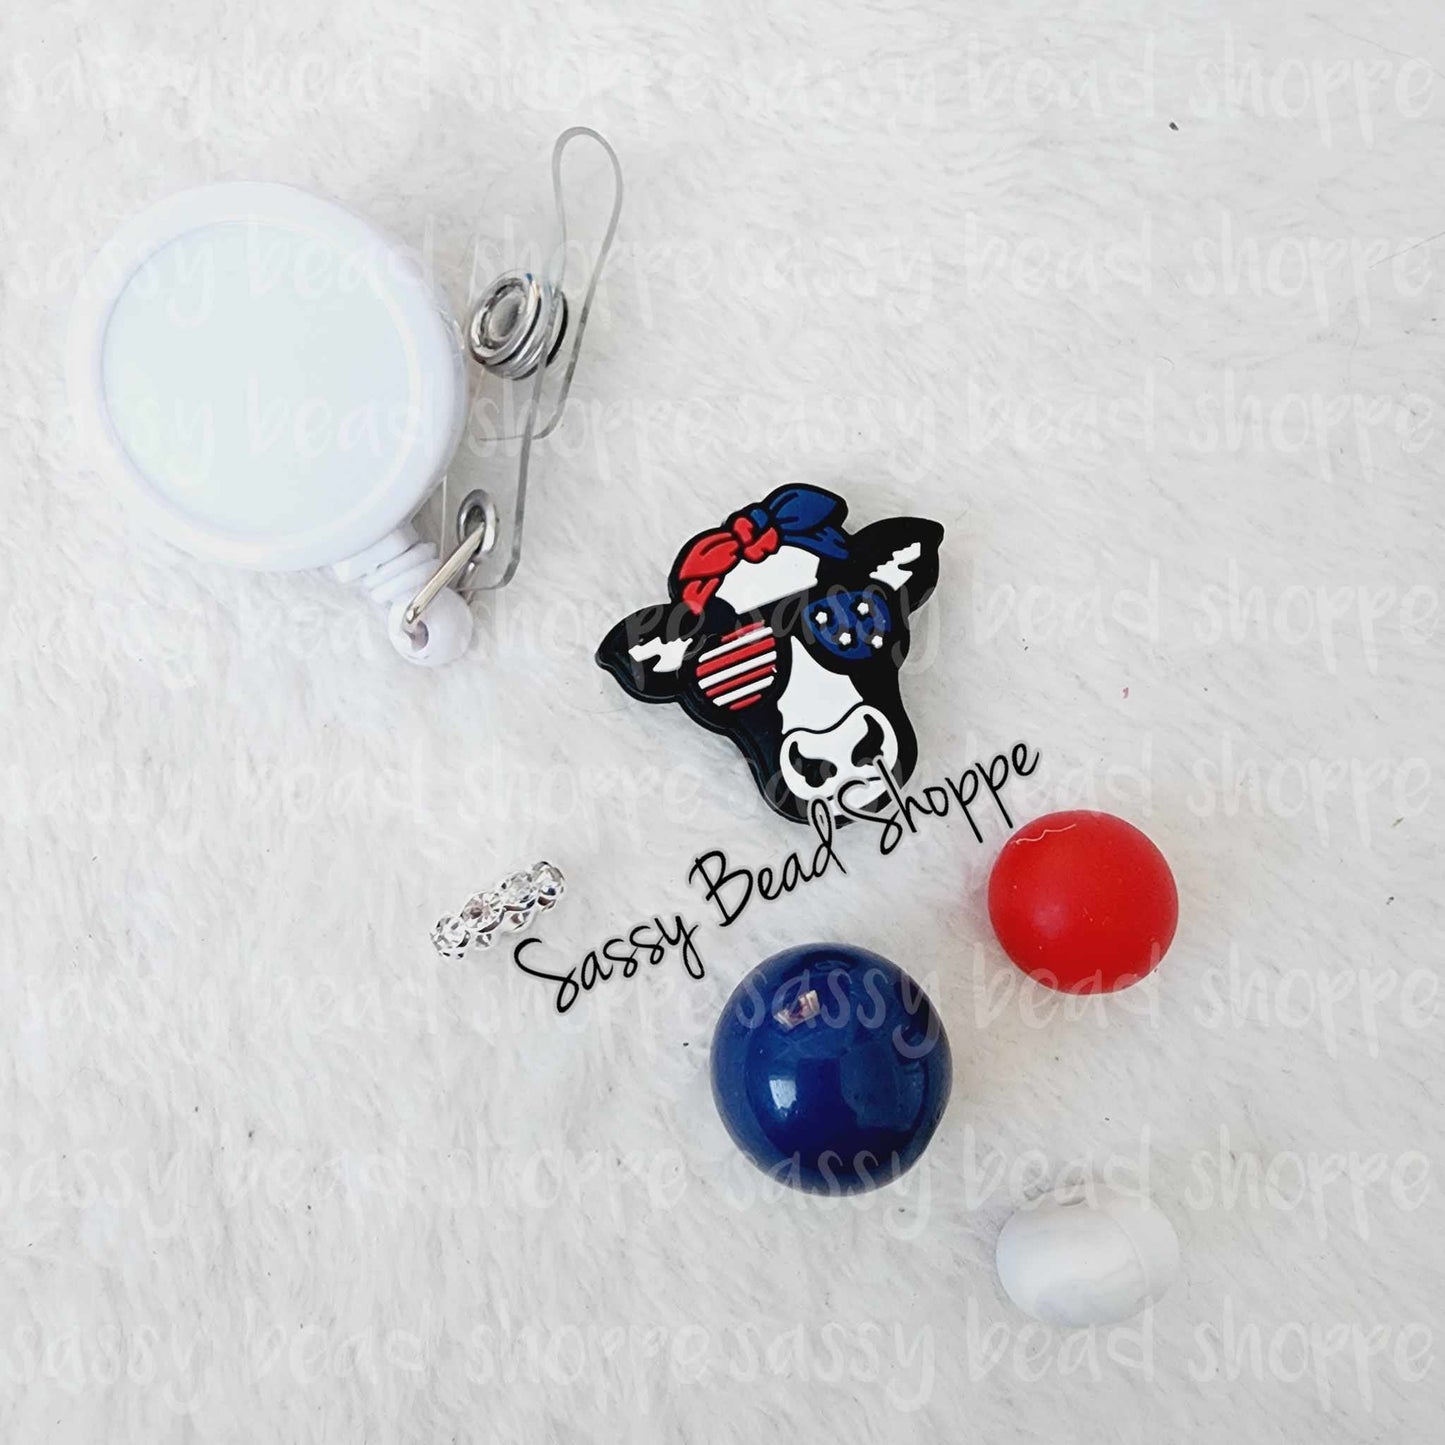 Sassy Bead Shoppe USA Badge Reel What you will receive in your kit